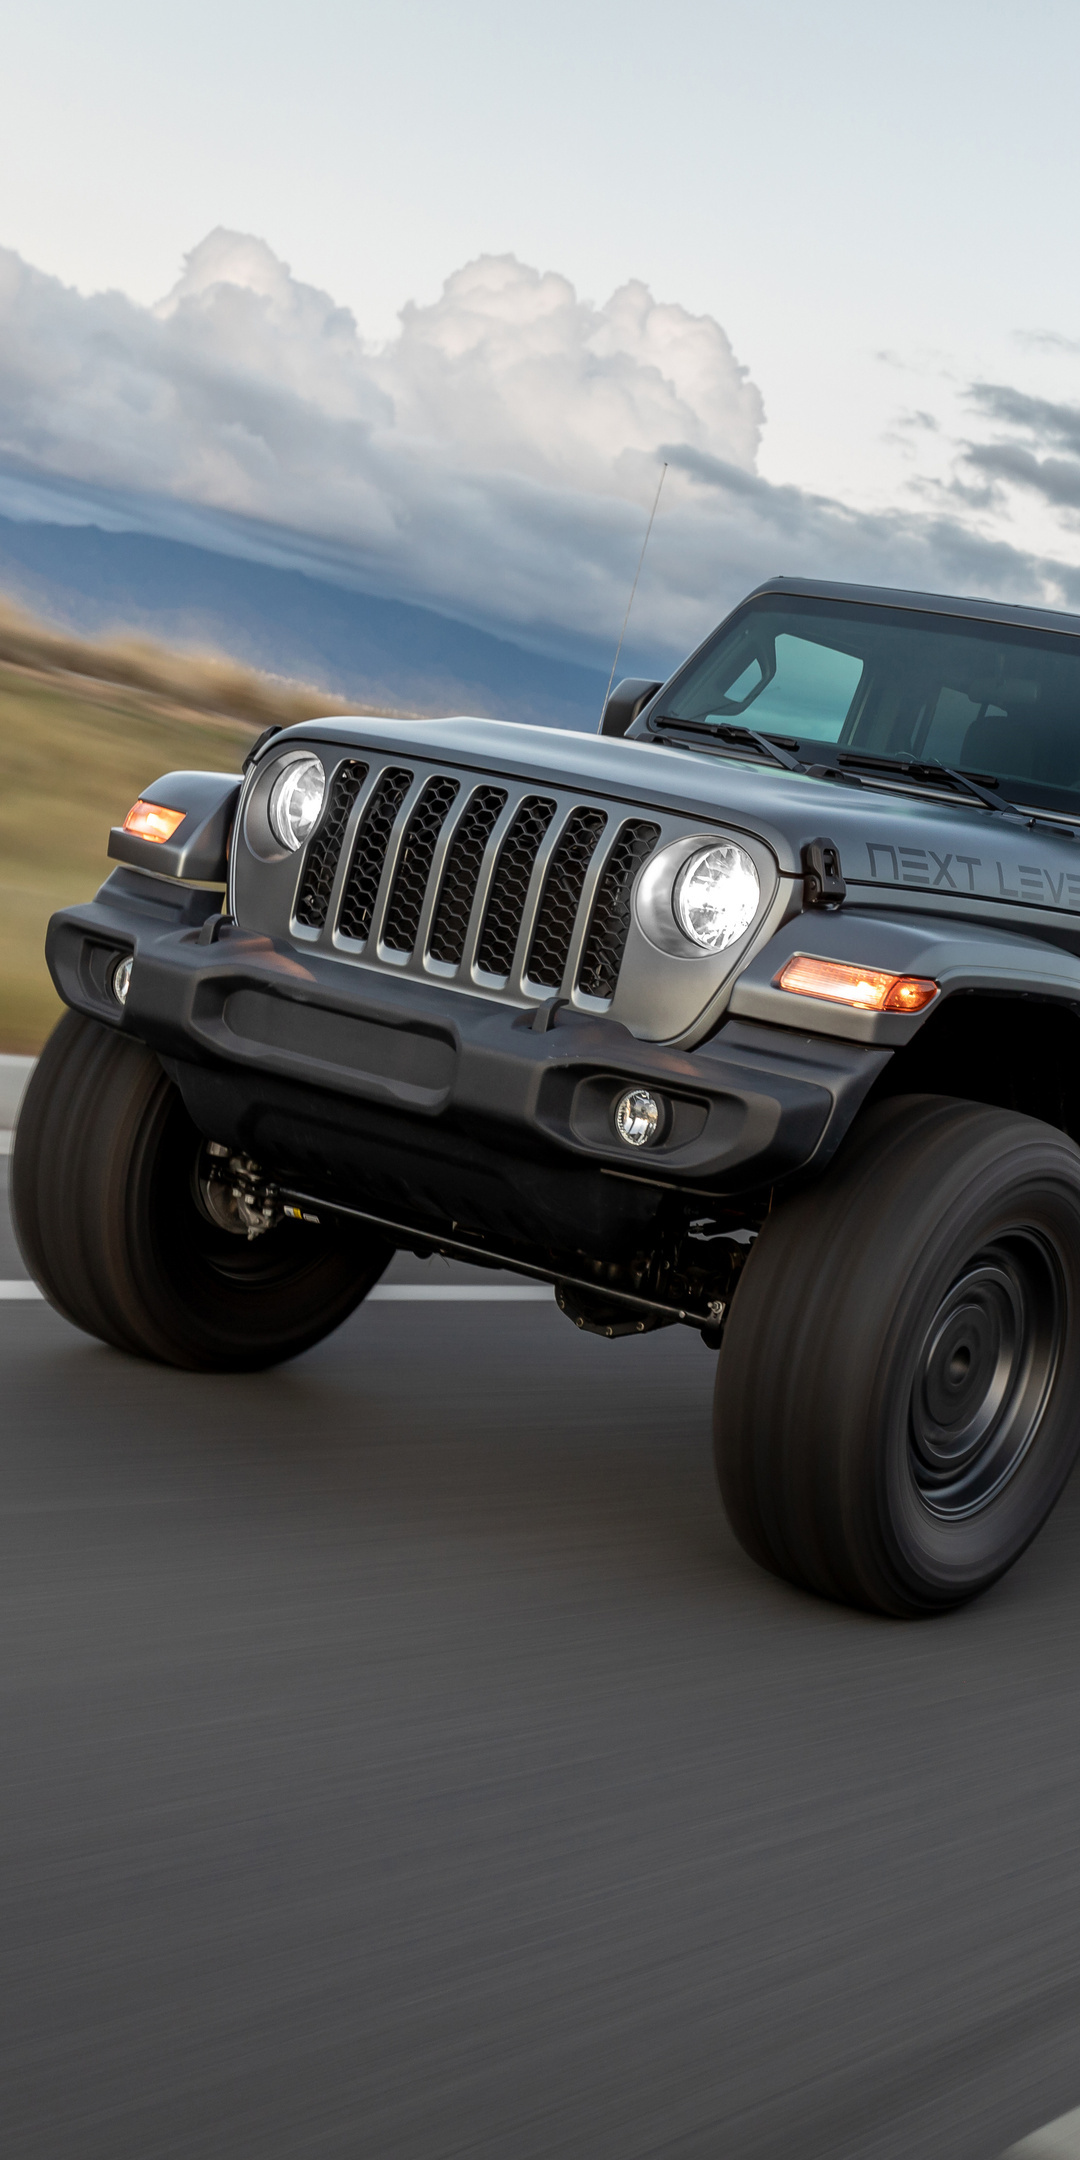 Jeep Gladiator, Next level, 2021 release, One plus 5t, 1080x2160 HD Handy